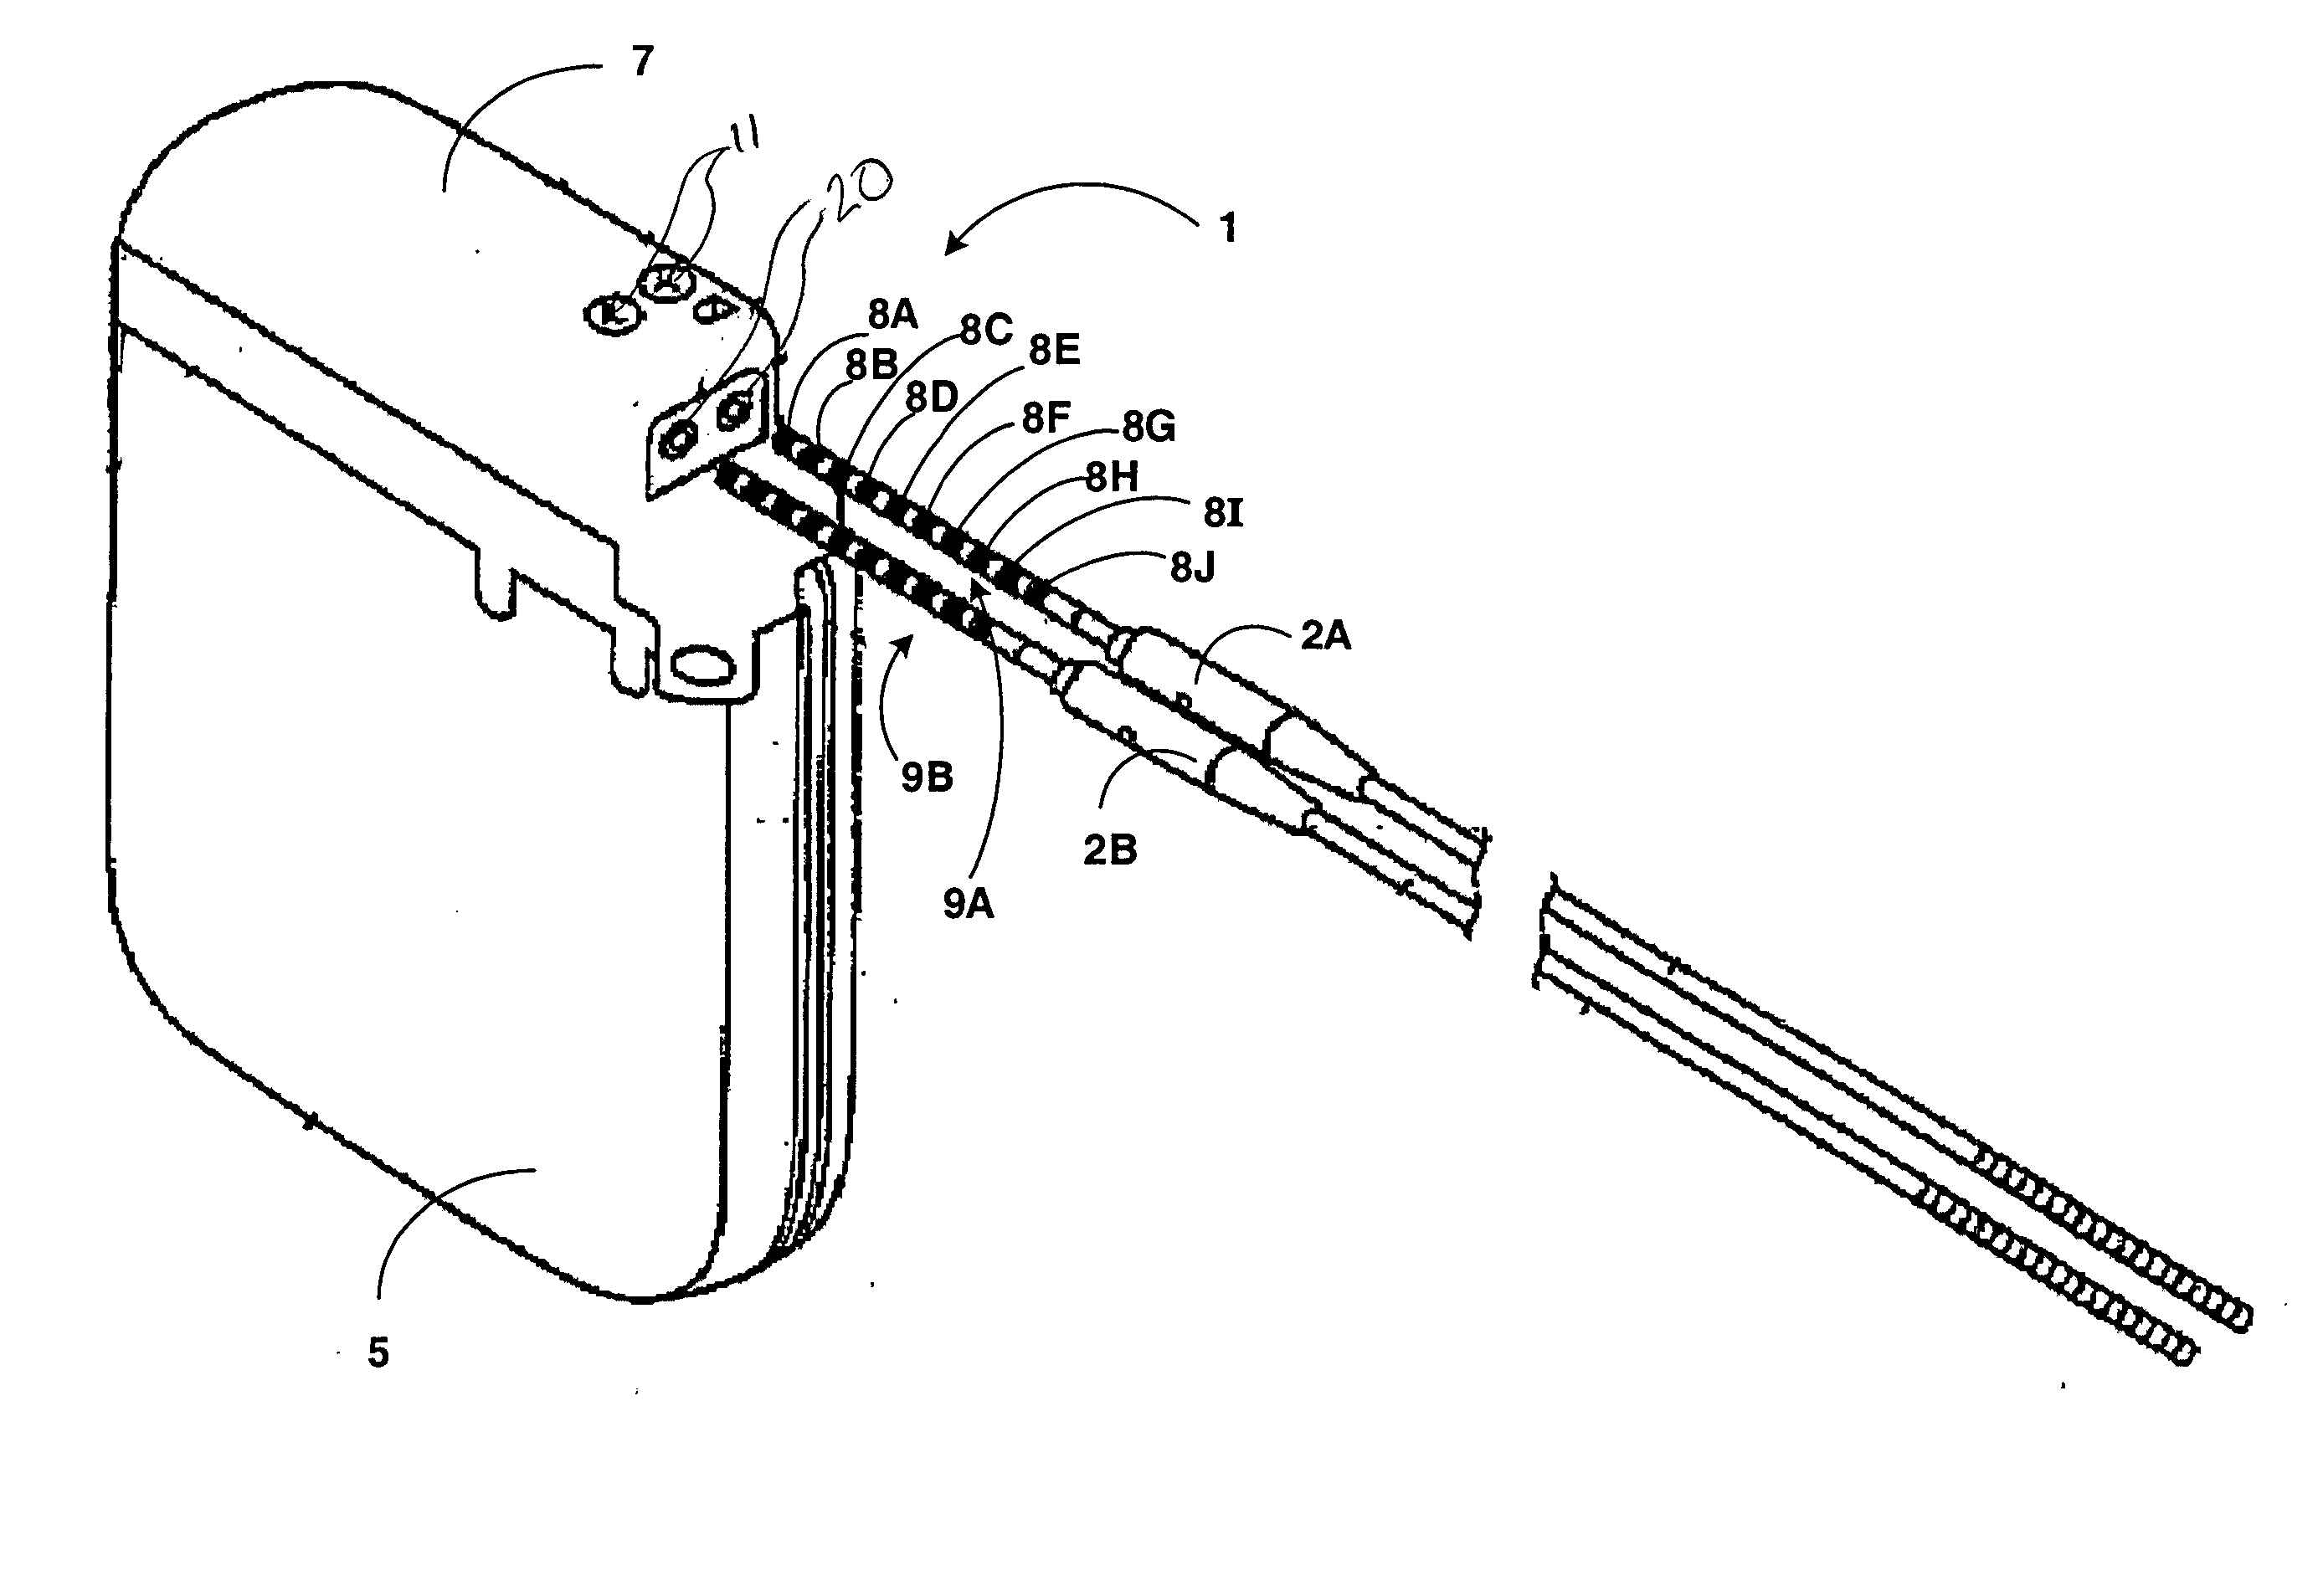 Connector assembly for connecting a lead and an implantable medical device